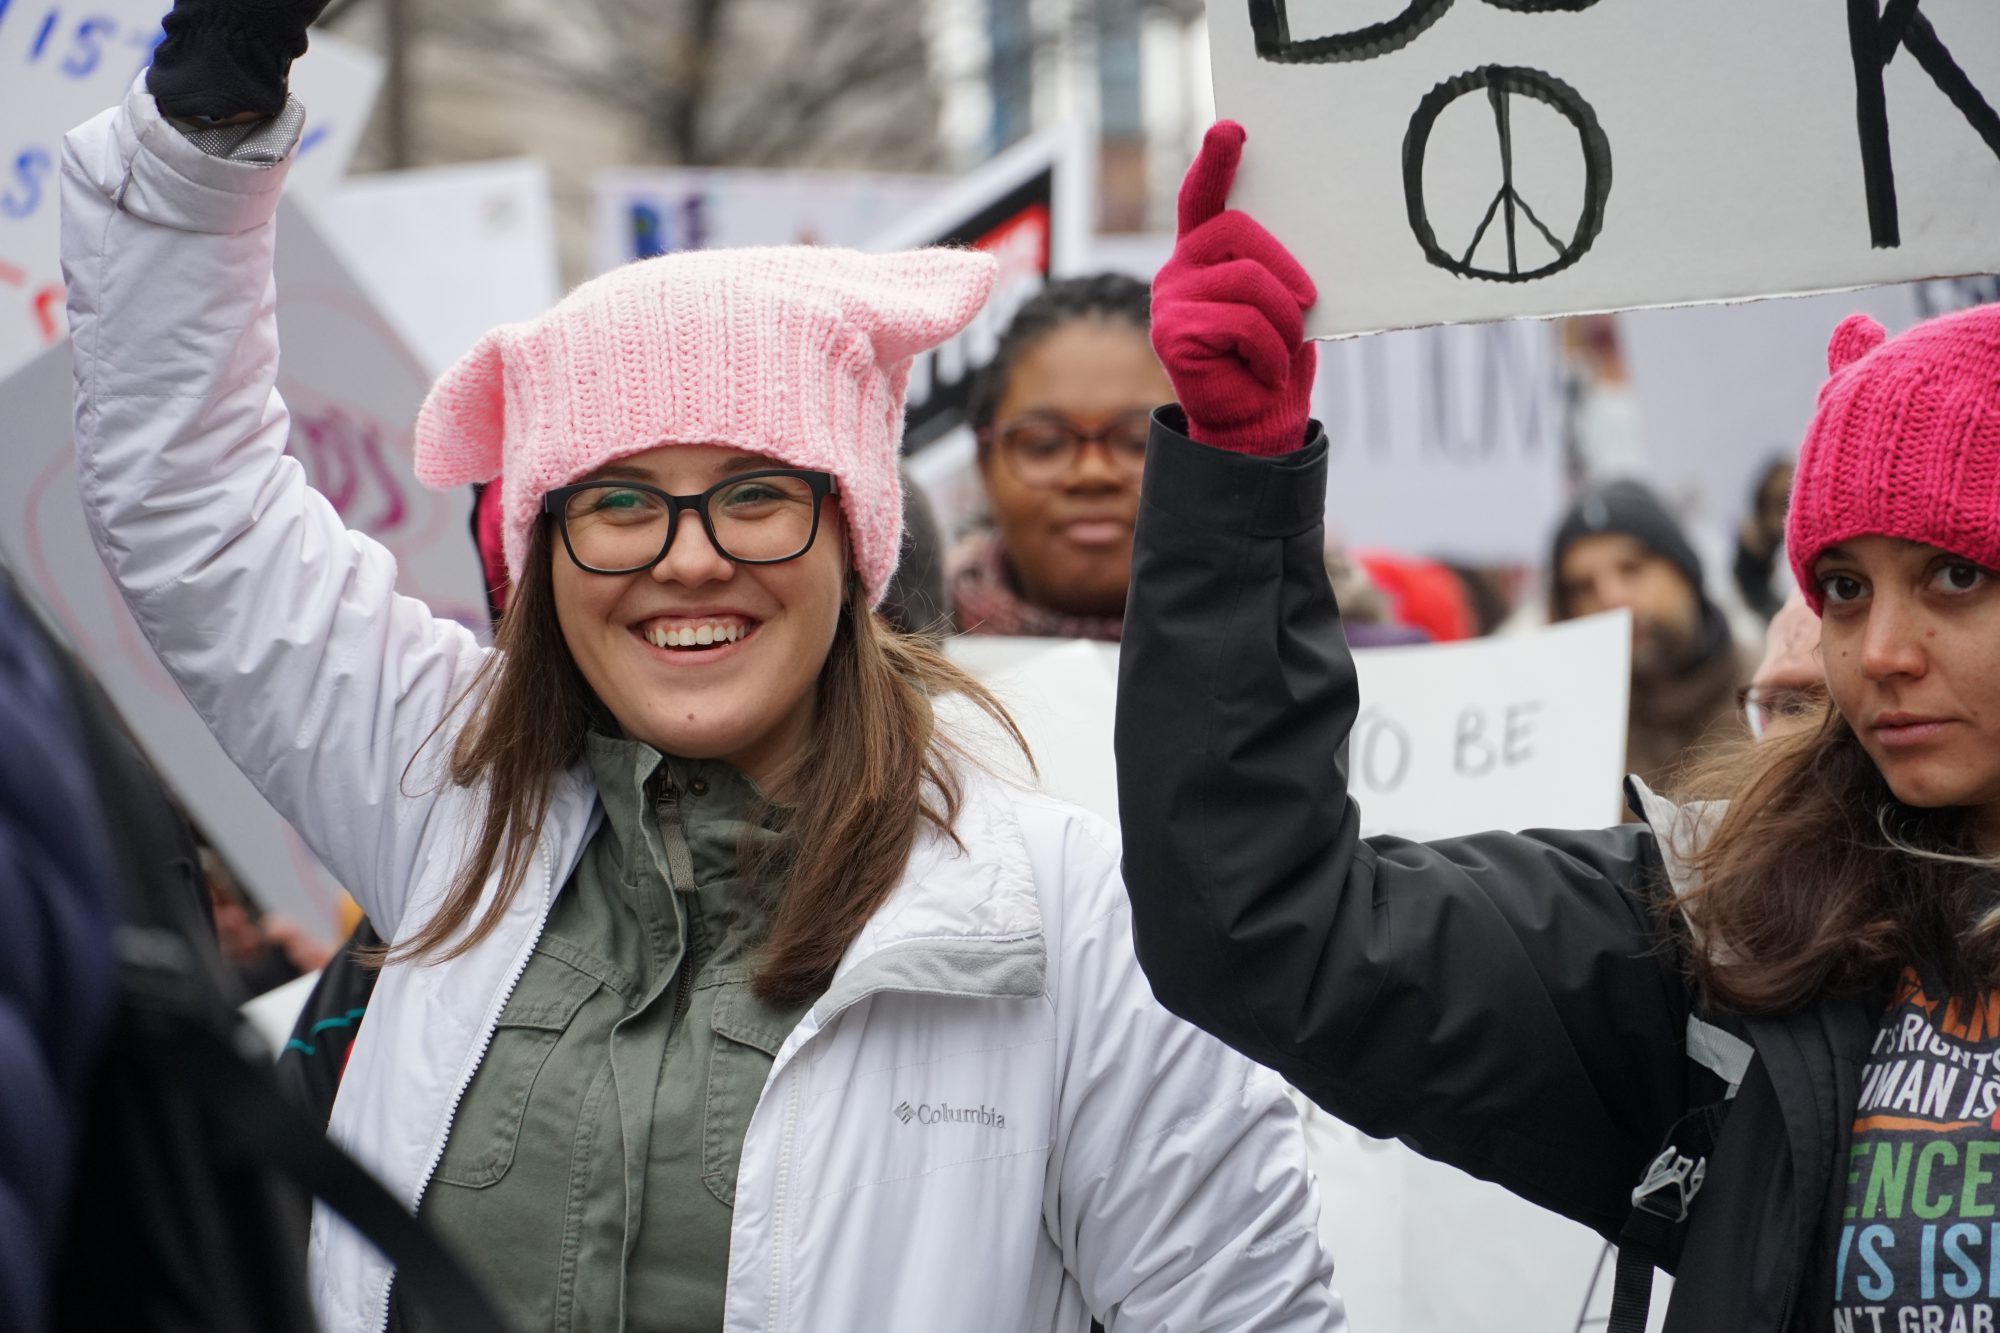 Women walked to and from Freedom Plaza at the Women's March. (Ester Wells/MNS)